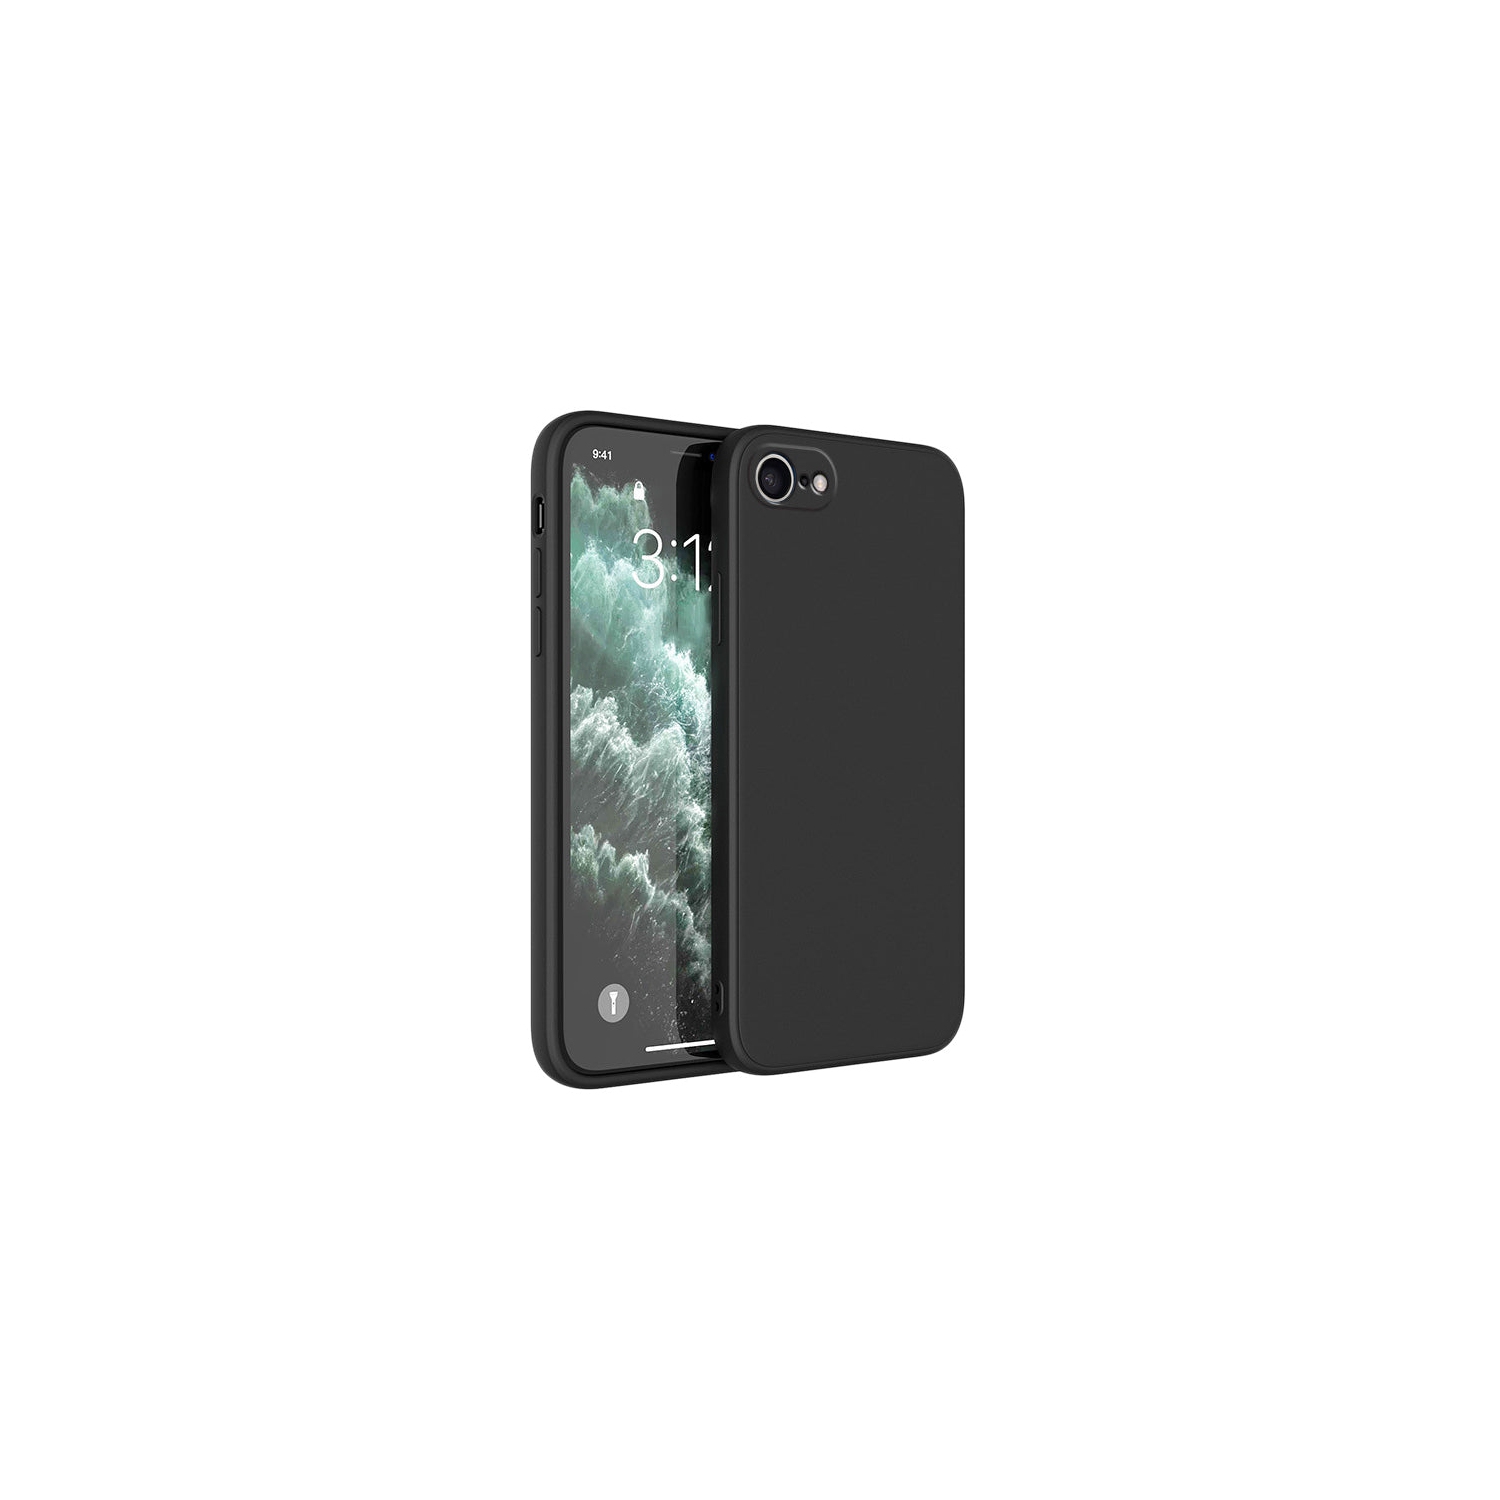 PANDACO Soft Shell Matte Black Case for iPhone 6 or iPhone 6S